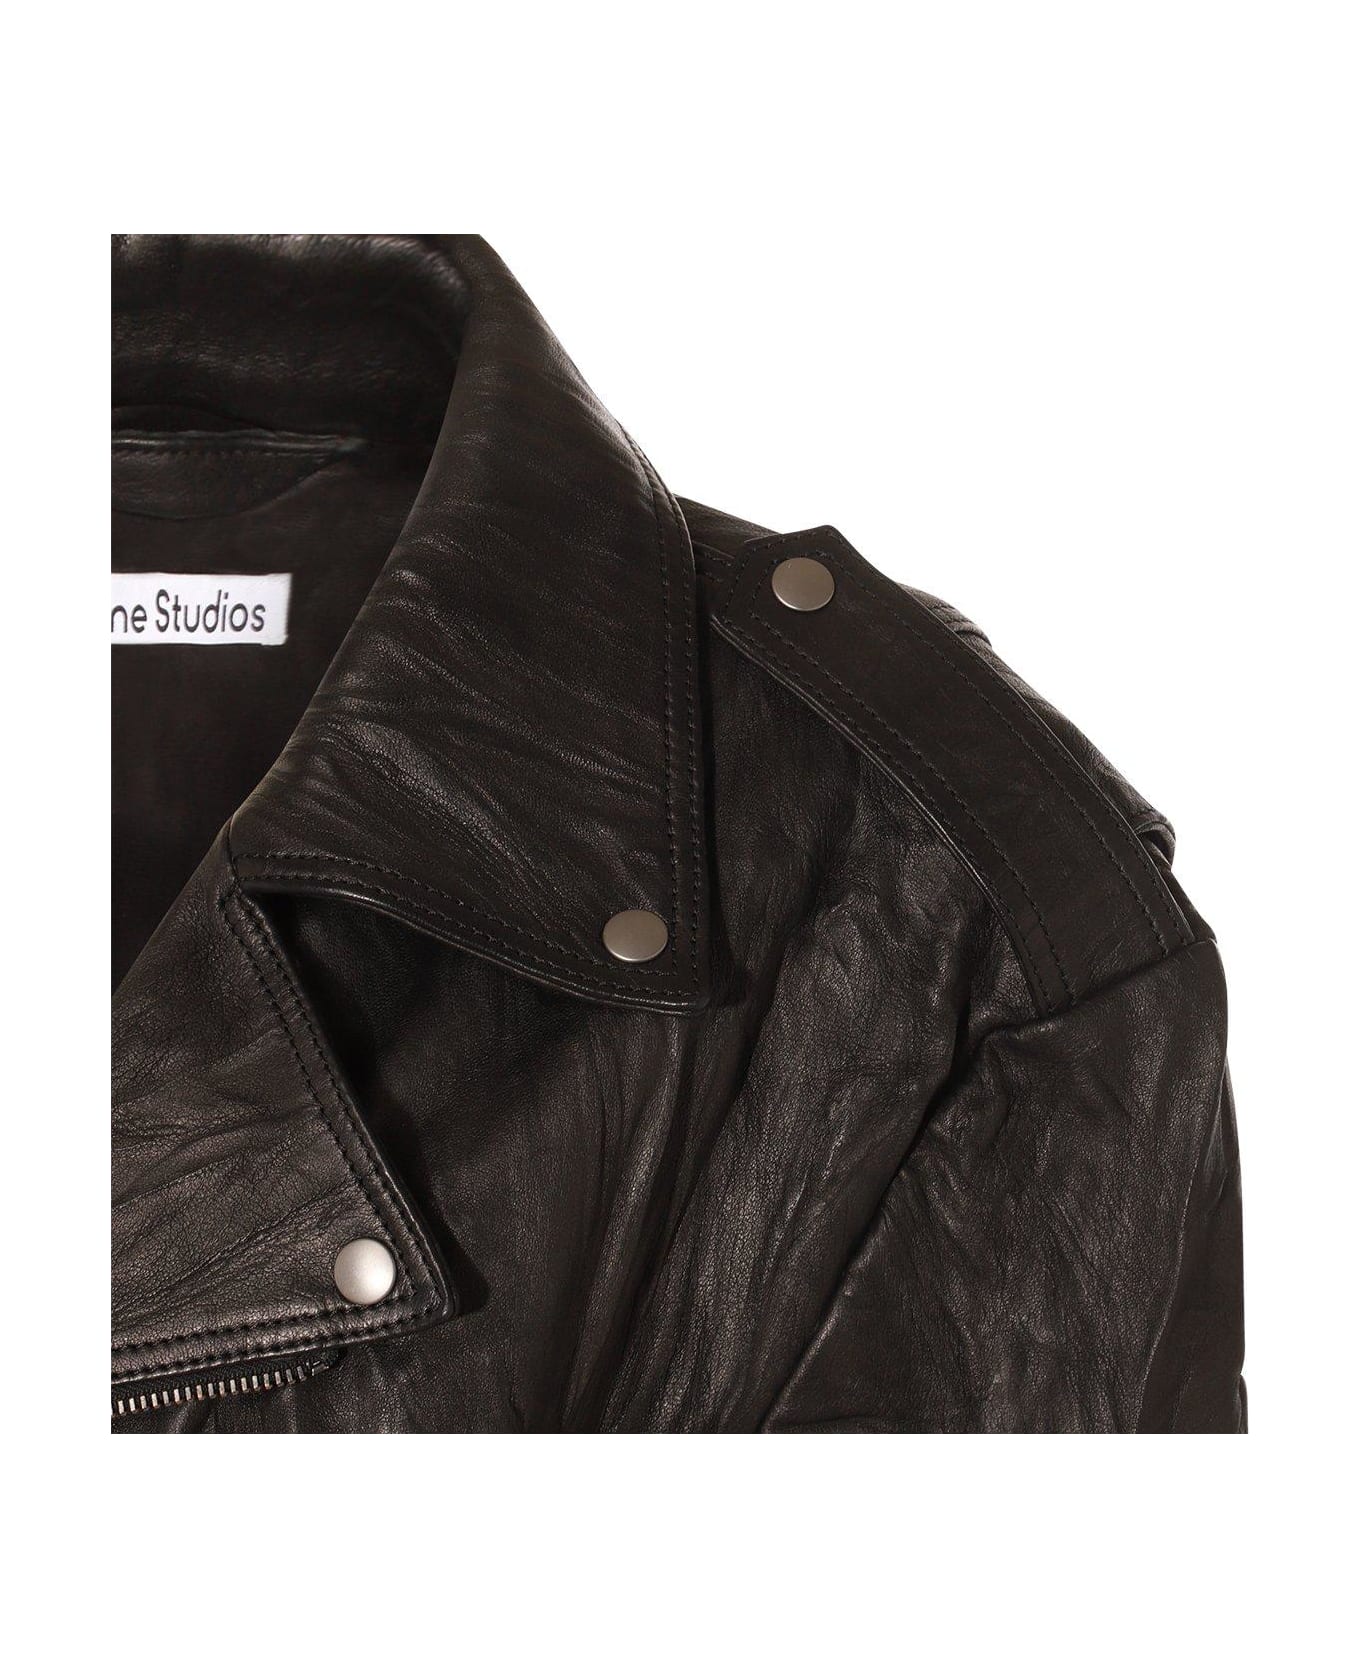 Acne Studios Double-breasted Zip Leather Jacket - Black